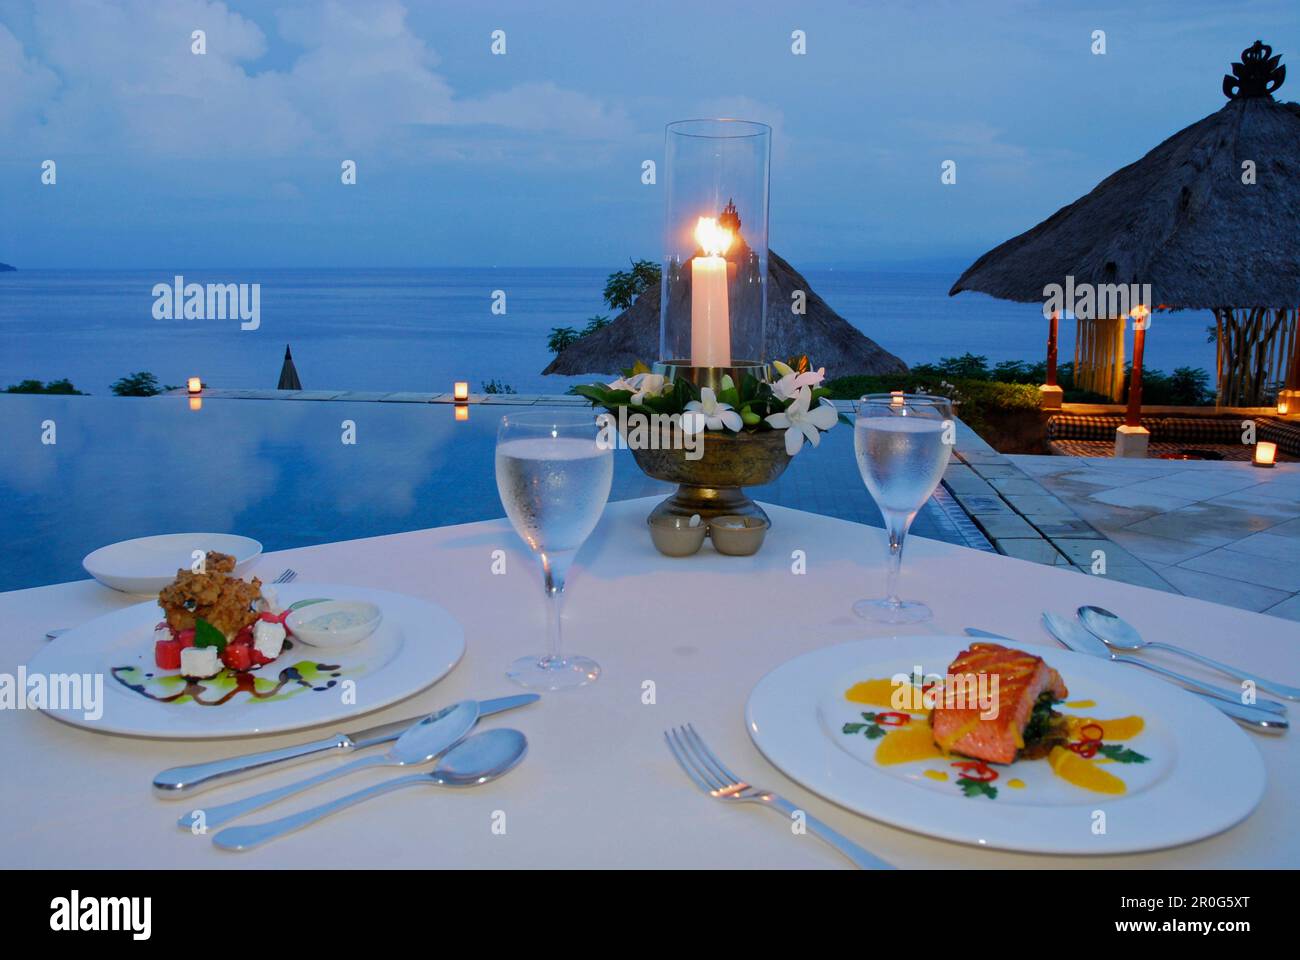 A table is laid at the pool at Amankila Resort in the evening, Candi Dasa, Eastern Bali, Indonesia, Asia Stock Photo